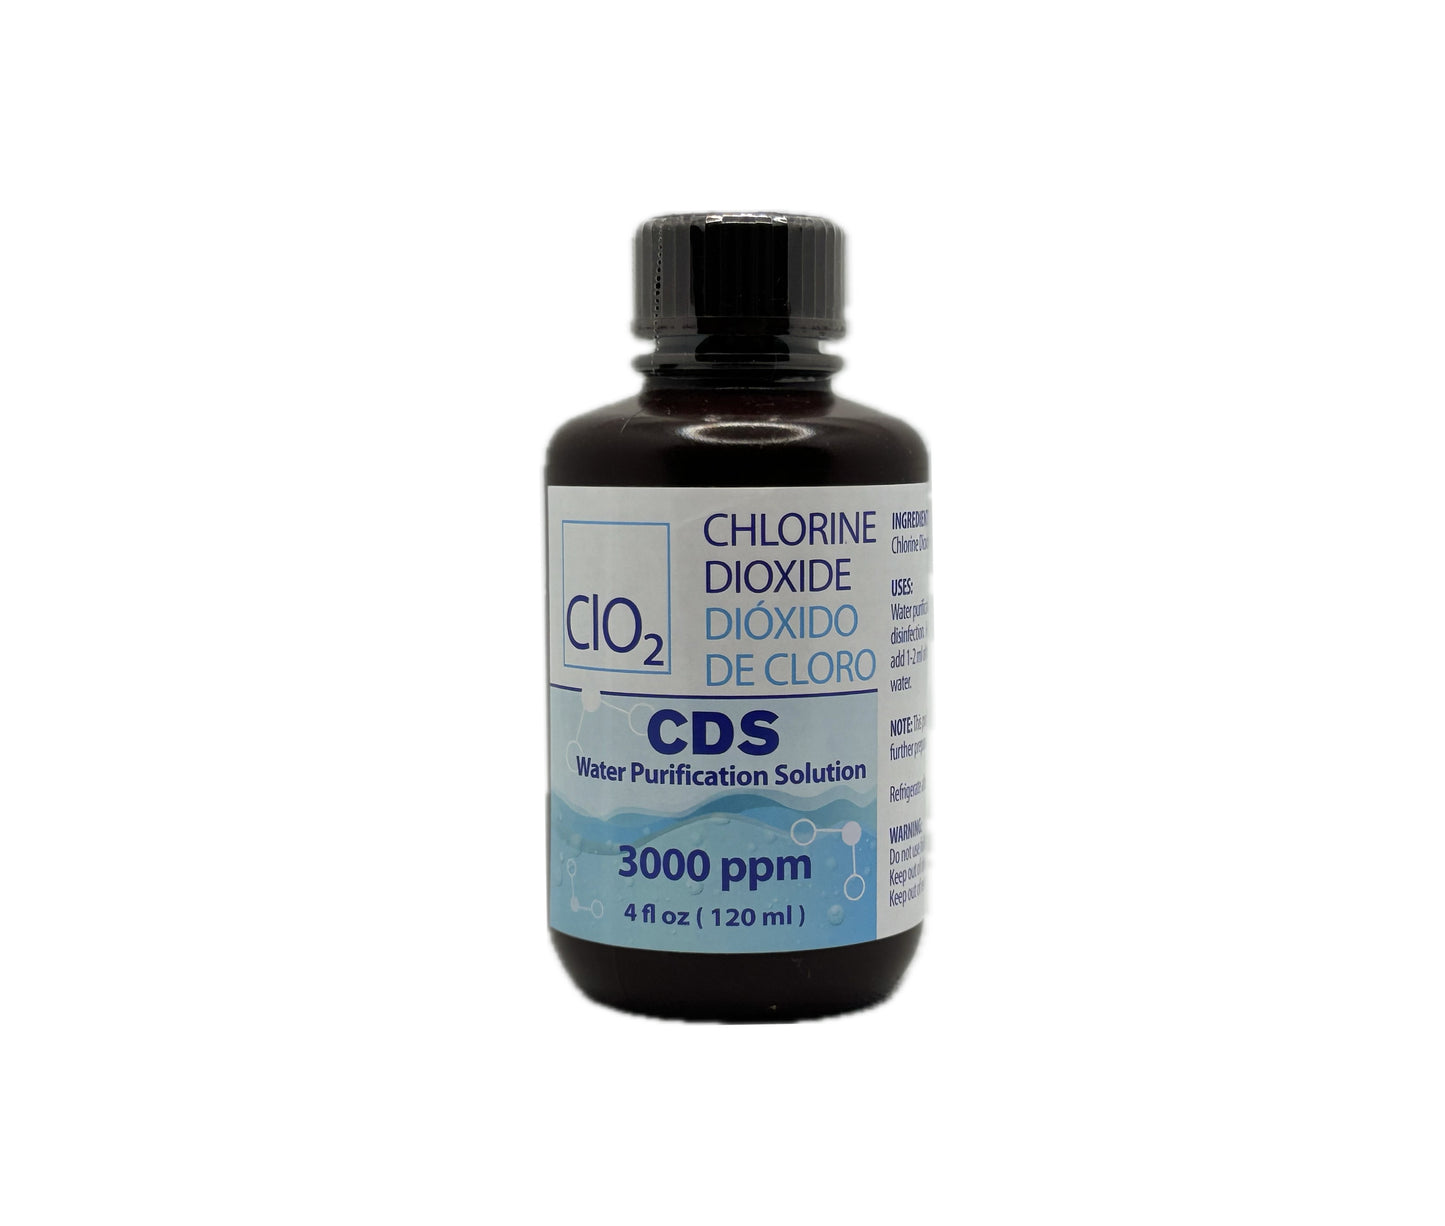 CDS Water Purification Solution - Chlorine Dioxide